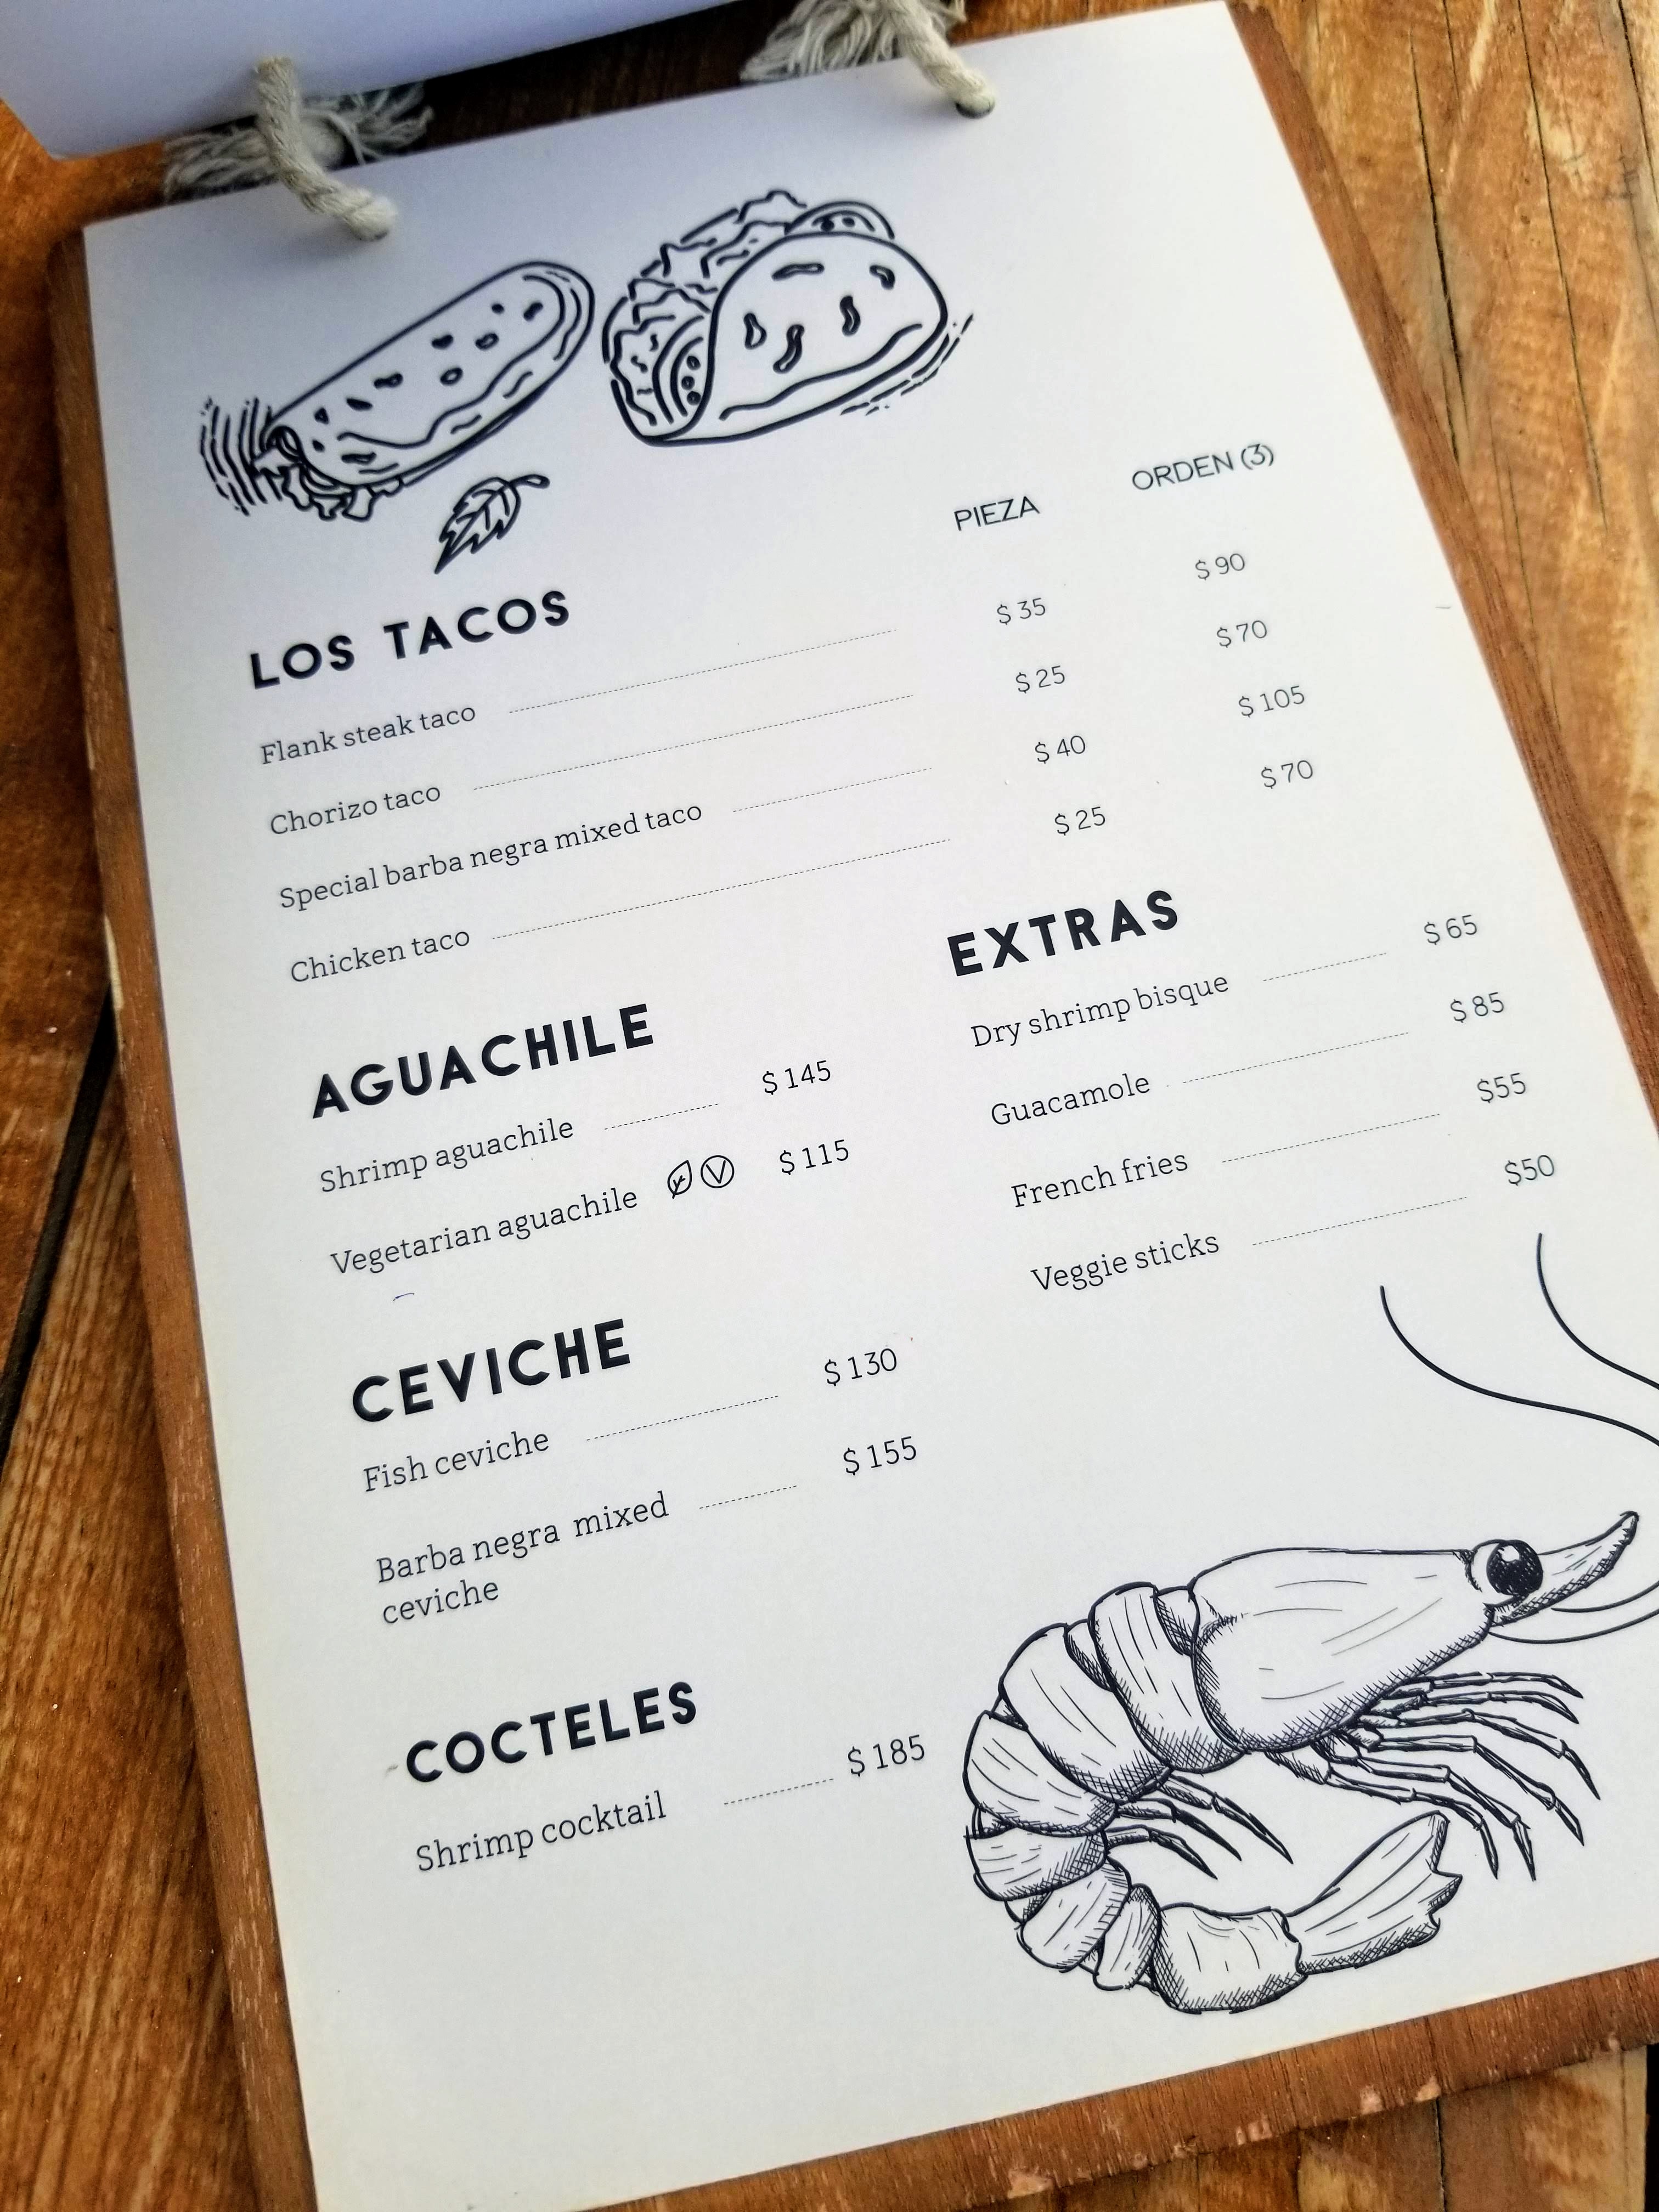 The second page of Barba Negra's menu with more tacos, ceviche, and guacamole.